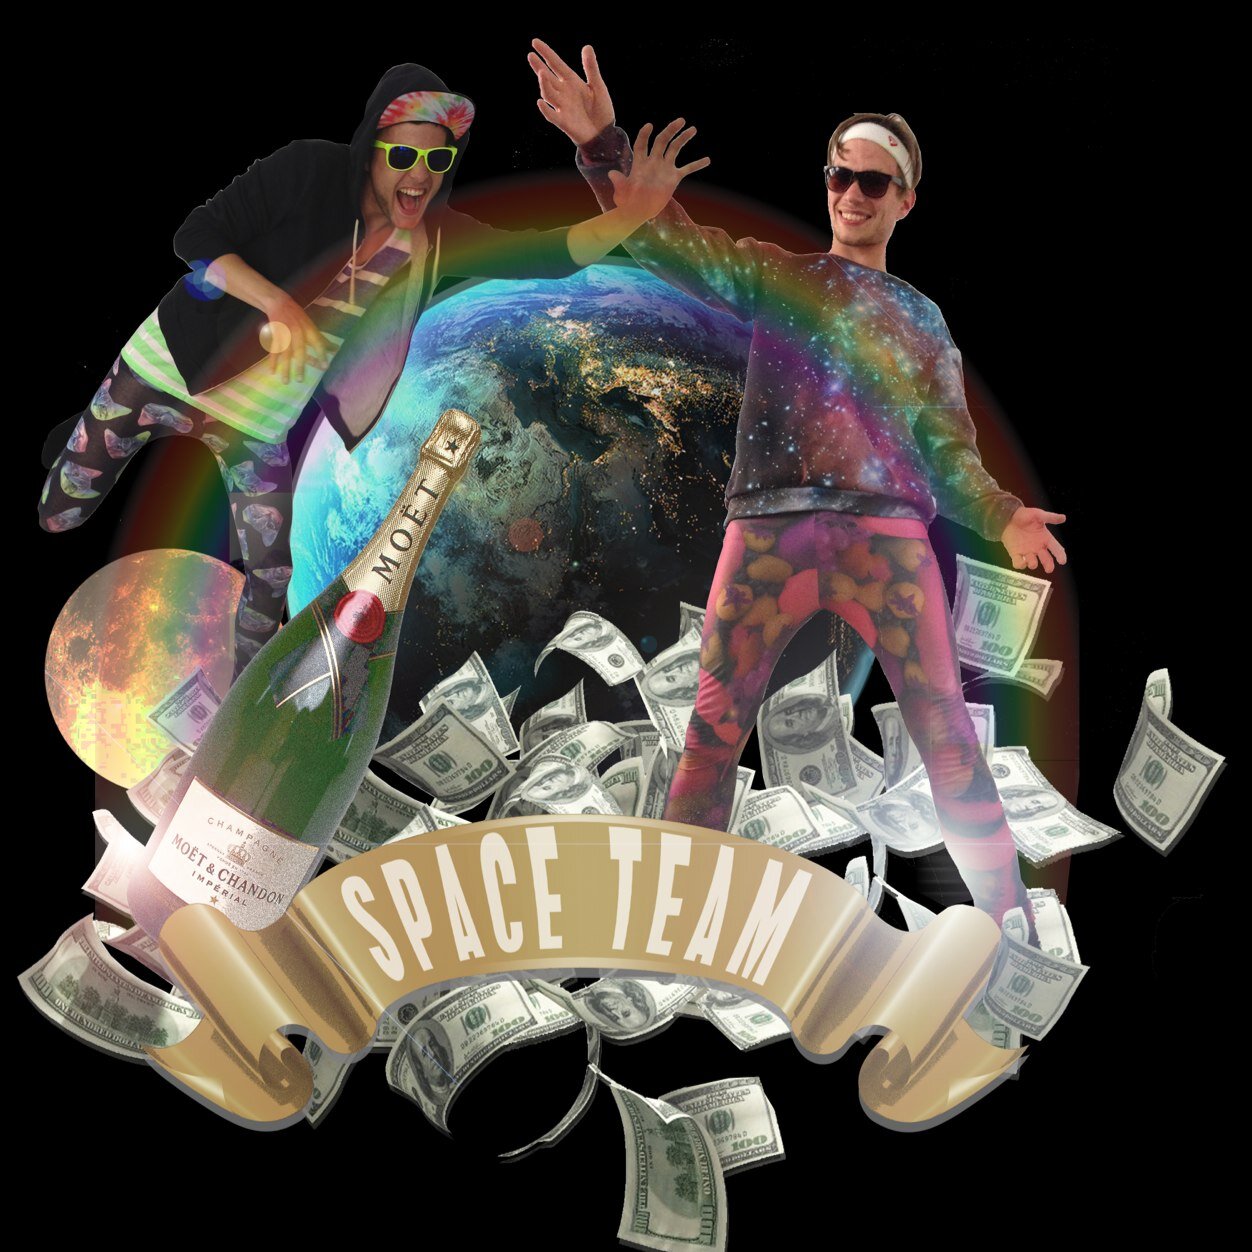 GOLD AND LOVE, THE INTERNATIONAL RAP-GROUP; SPACE TEAM, GOT EVERYTHING YOU COULD IMAGINE, AND FAR BEYONE THAT! // LOVE #WALKINGGOLDMINE AND PINLIGTAVSHED